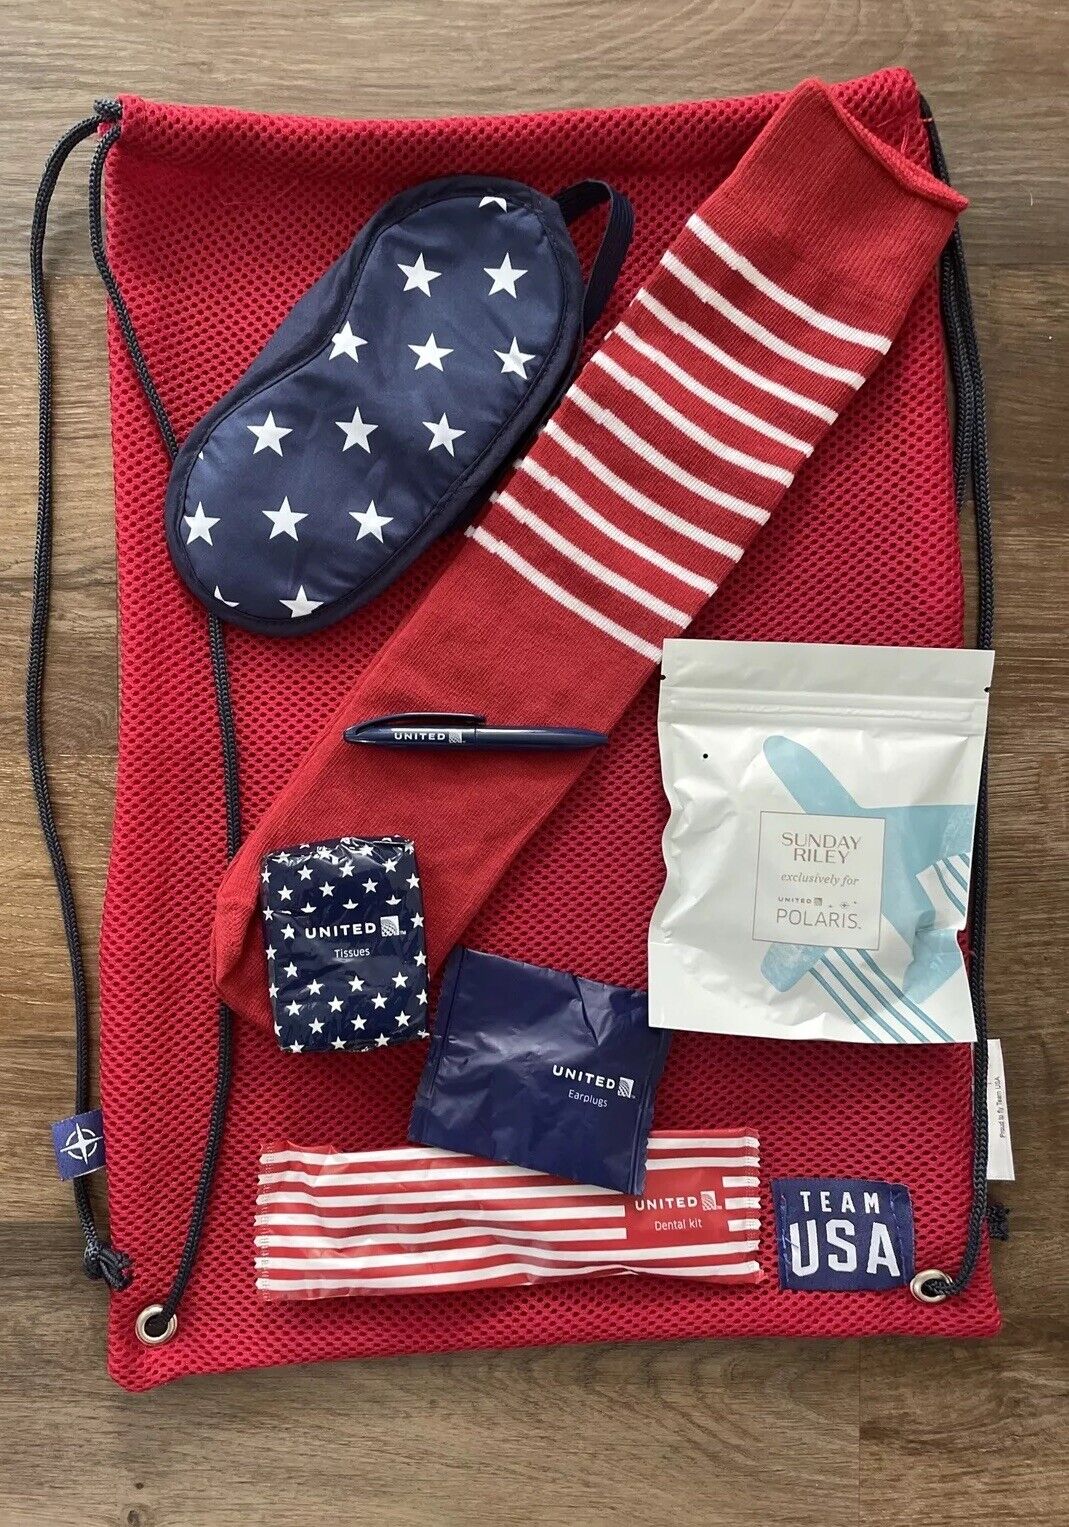 New RED United Airlines Polaris Team USA Amenity Kit